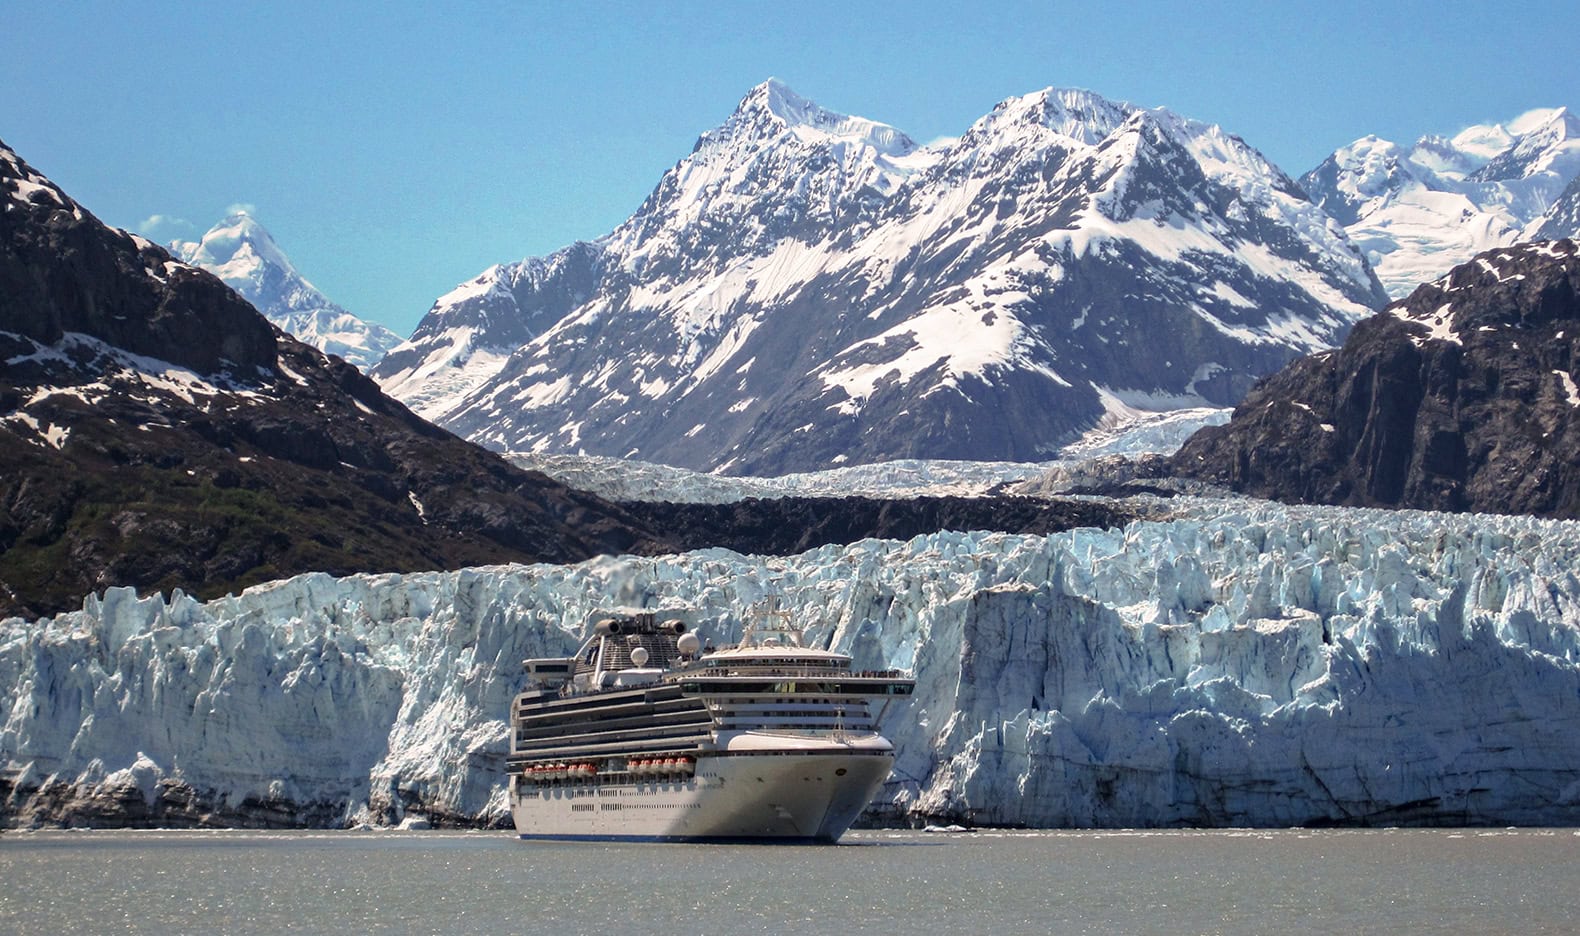 Essential Advice for Making the Most of Your Alaska Cruise